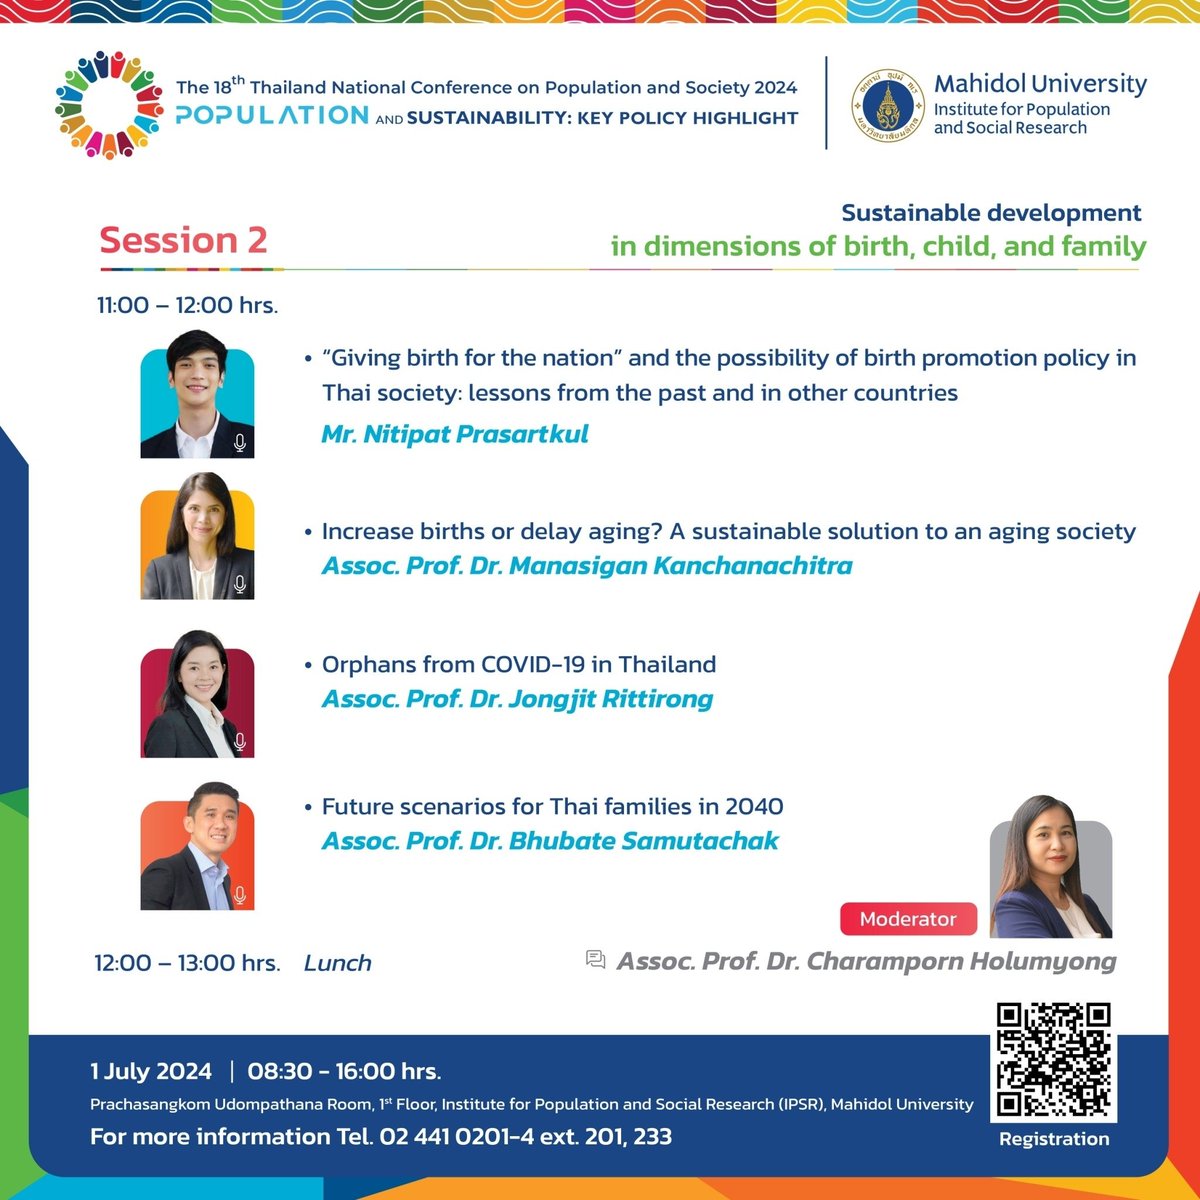 == ⭐️SAVE THE DATE⭐️ ==

The 18th #Thailand #Conference on Population and #Society 2024
'#Population and #Sustainability: Key #Policy Highlight'

Register here: ipsr.mahidol.ac.th/annual-confere…

#news #children #family #labour #olderpeople #food #Health #research #IPSR #MahidolUniversity